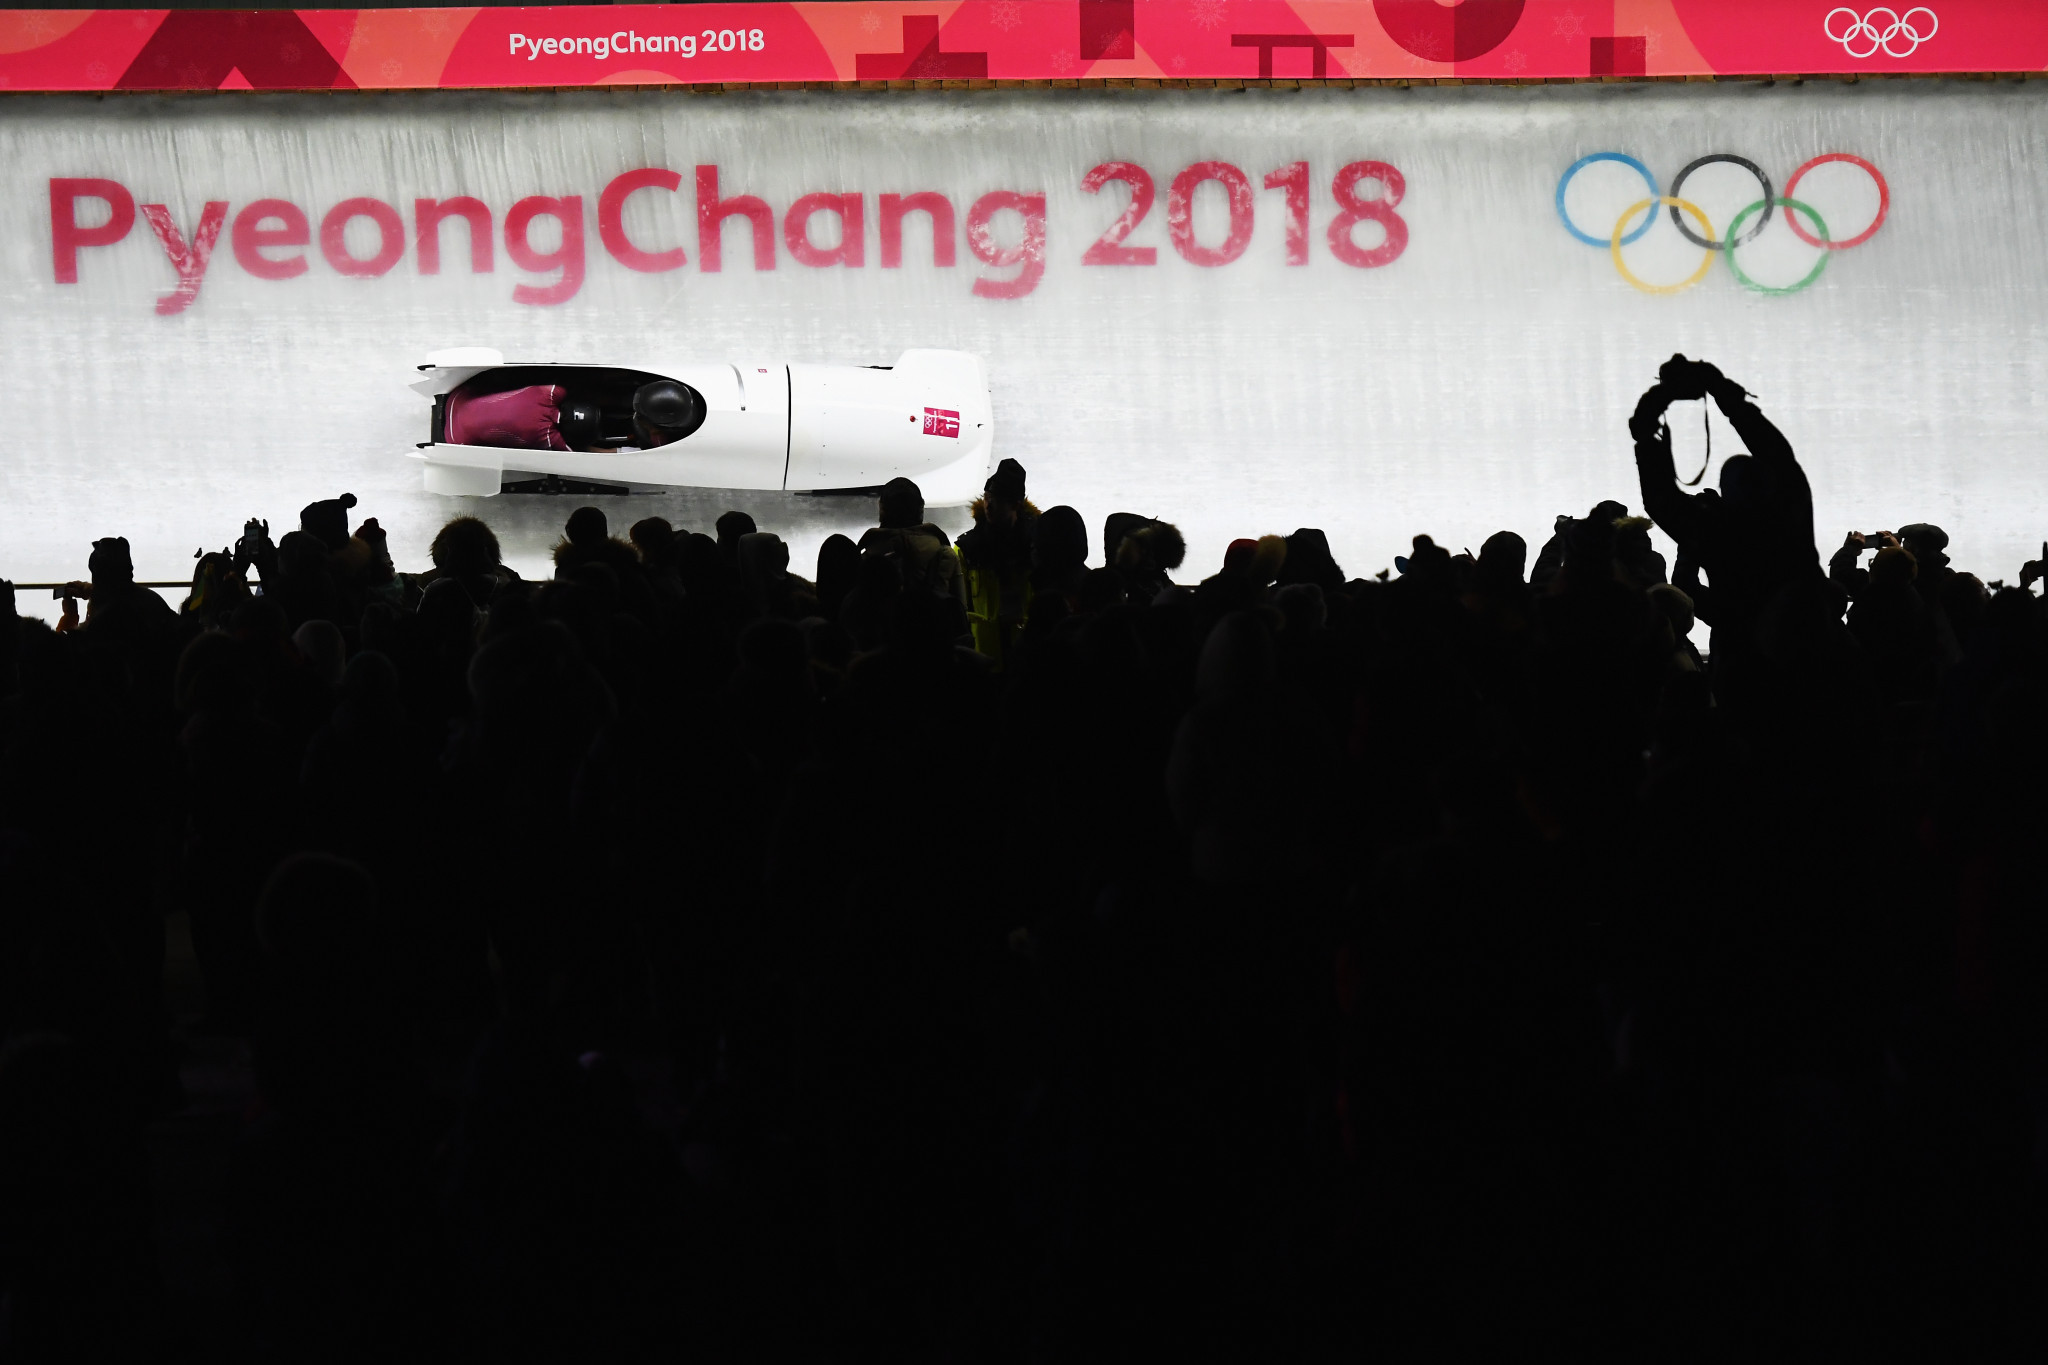 Anastasia Kocherzhova and Nadezhda Sergeeva finished 12th in the two-woman bobsleigh event at Pyeongchang 2018, but the result was cancelled after the latter's positive test for trimetazidine ©Getty Images